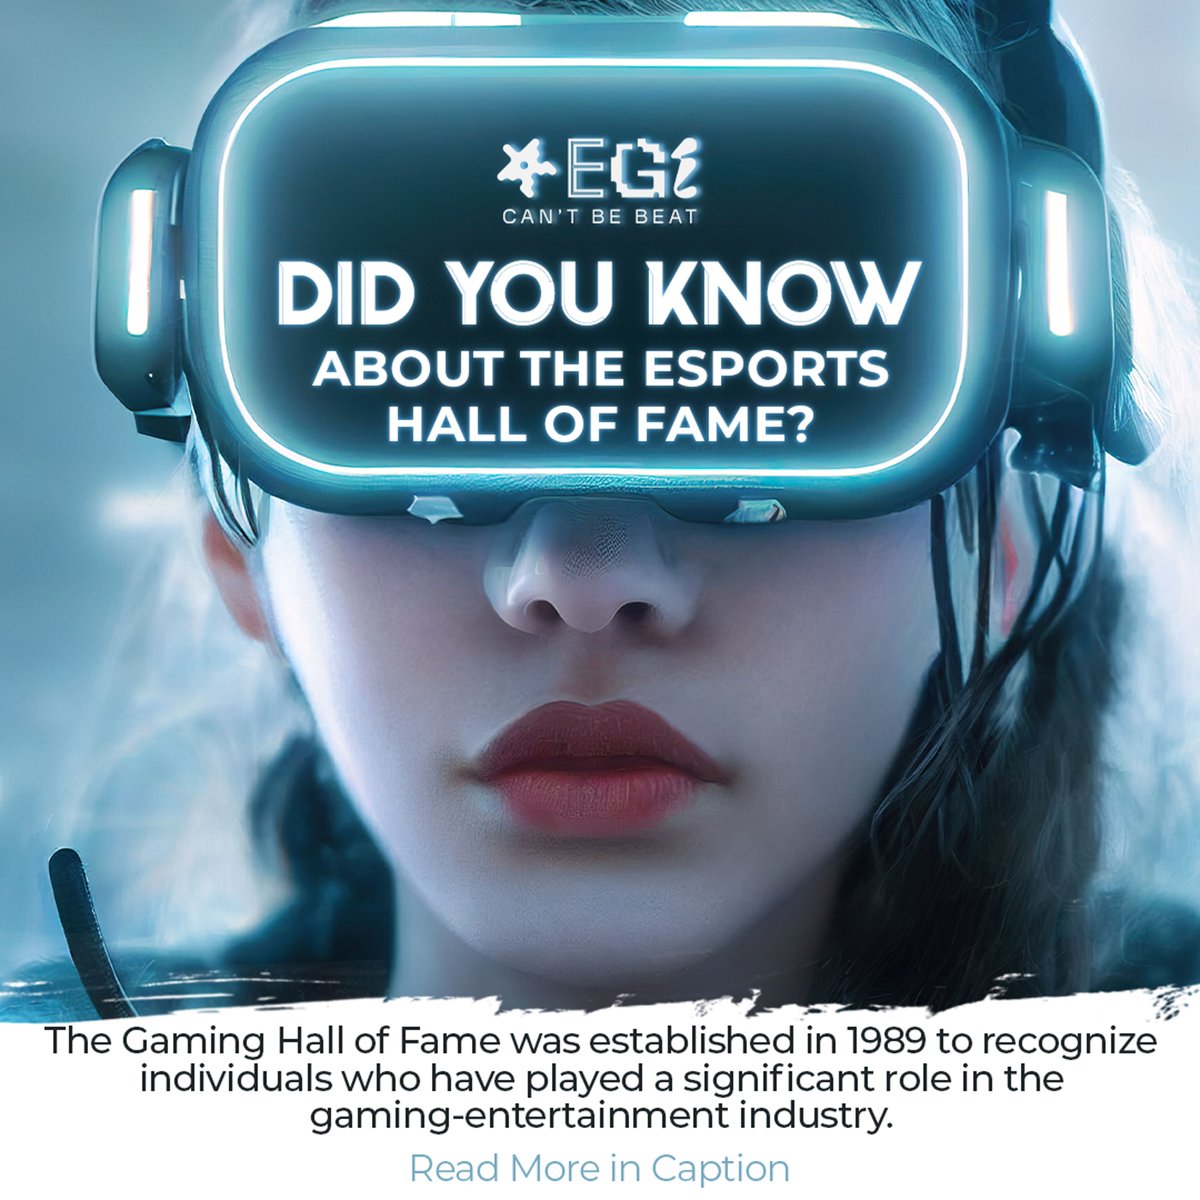 The Gaming Hall of Fame was established in 1989 to recognize individuals who have played a significant role in the gaming-entertainment industry.
.
.
#ebullient #gaming #esports #teams #gamechanger #organisation #greatergame 
#industry #Promotion #industry #players